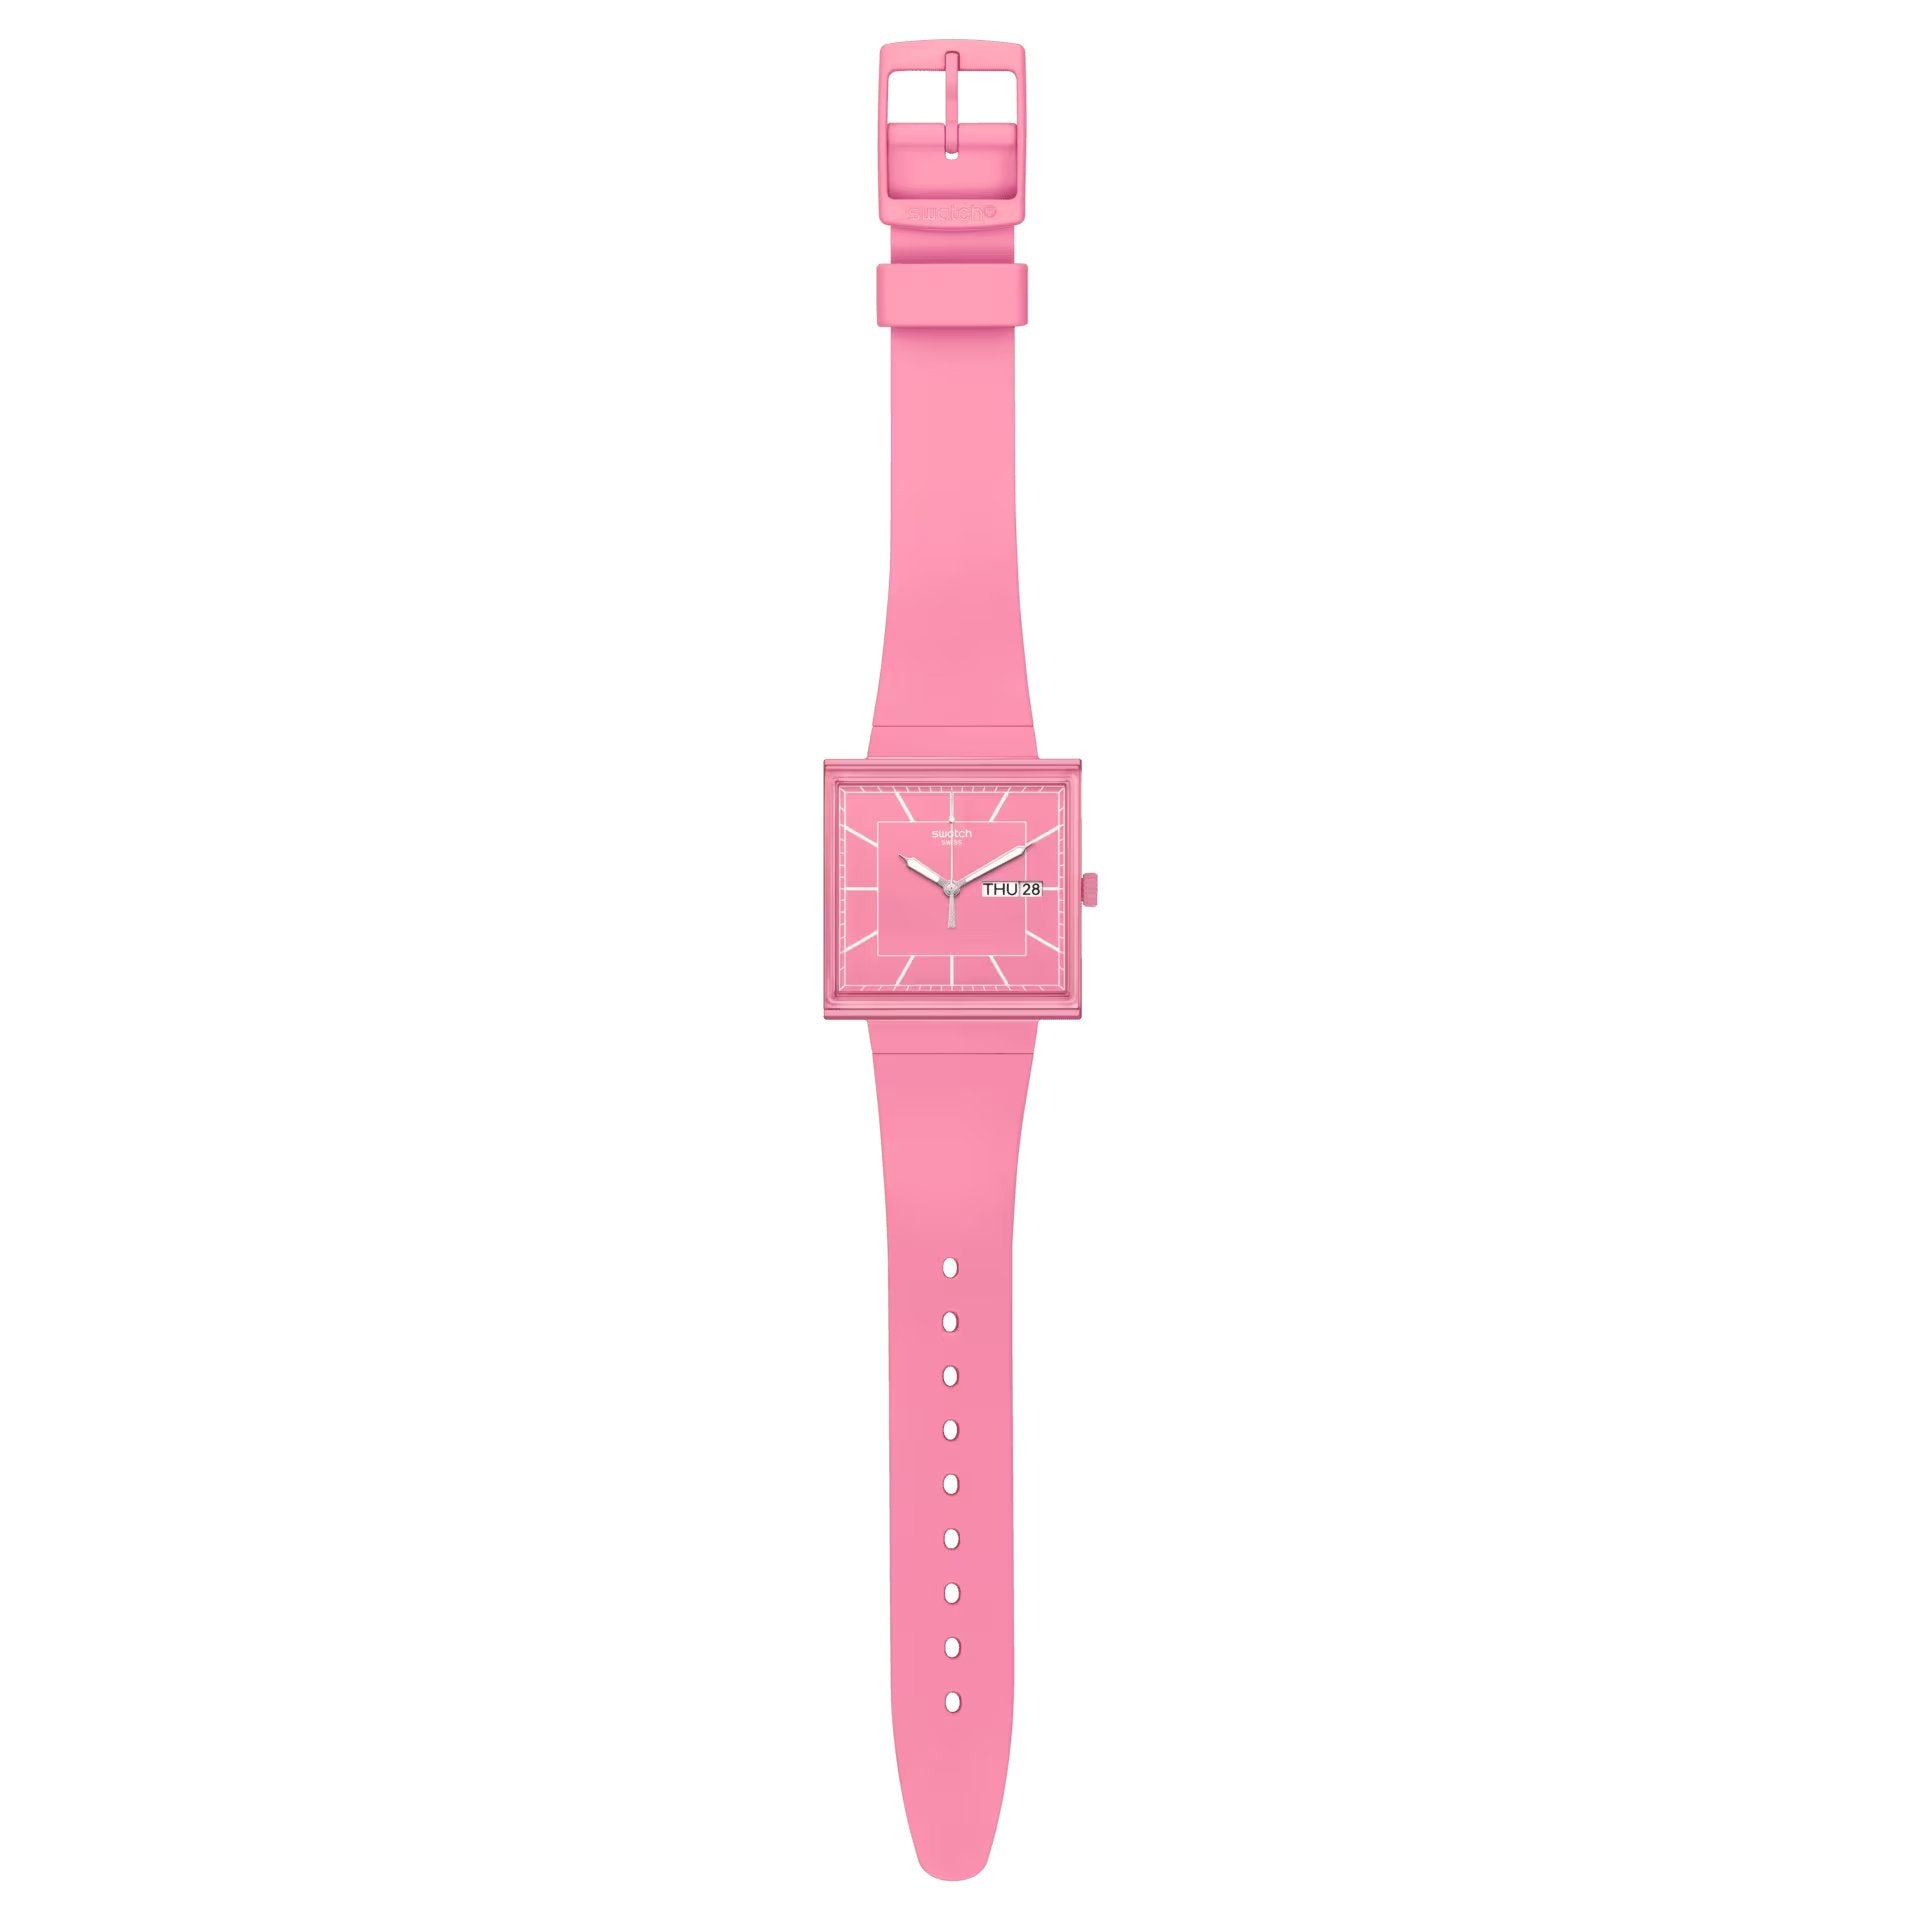 BIOCERAMIC WHAT IF COLLECTION WHAT IF ROSE - SO34P700 - Simmi Gioiellerie -Orologi